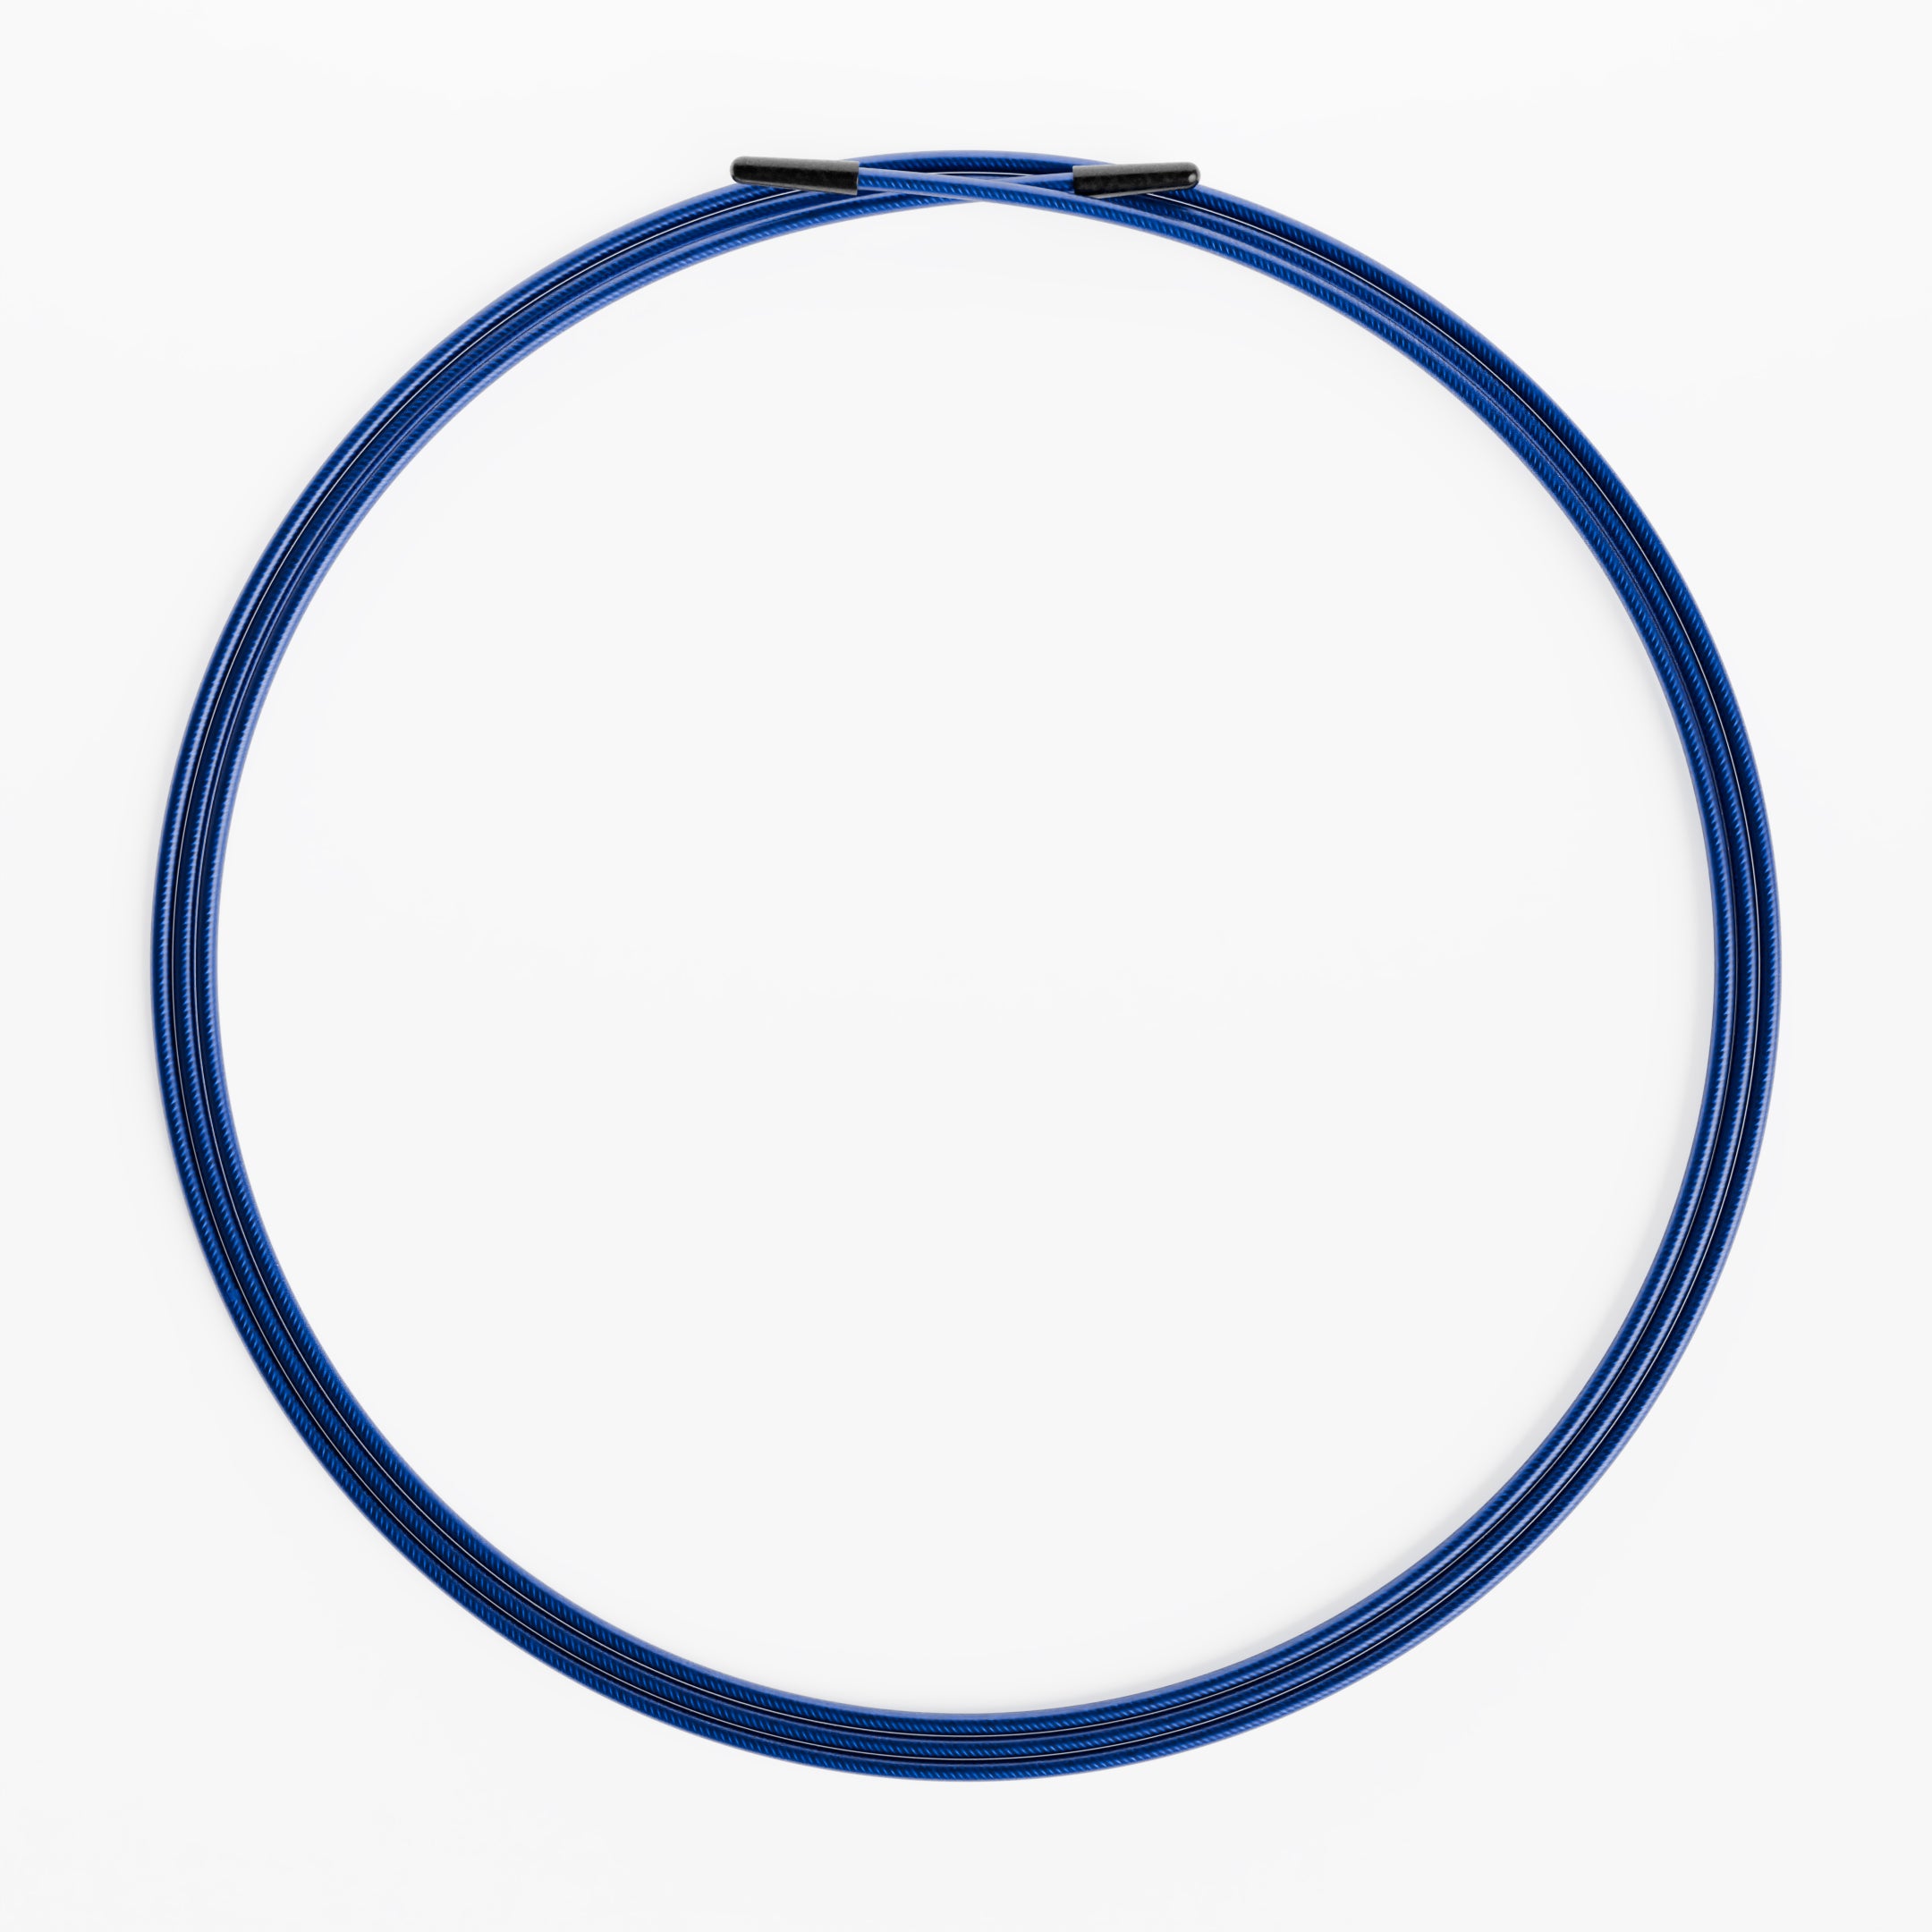 2.0 mm pvc coated spare wire